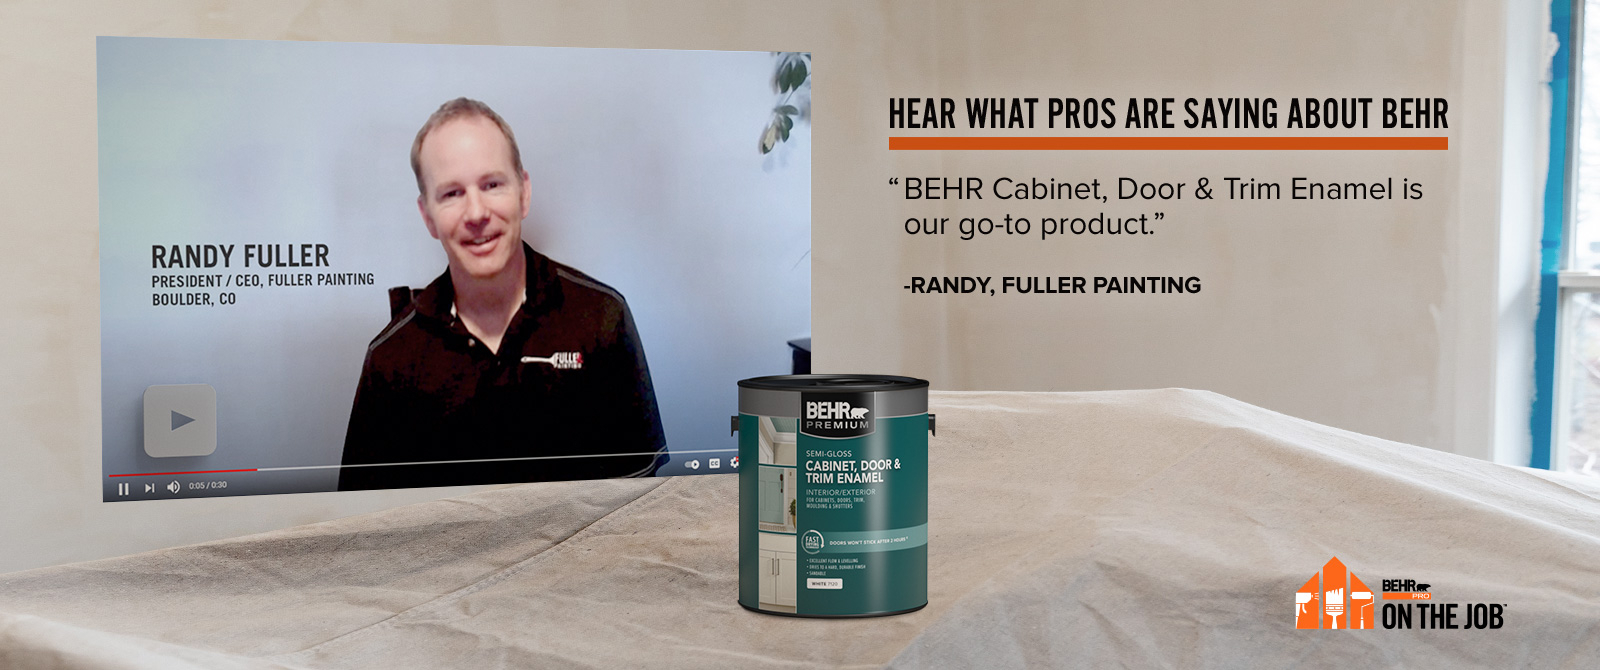 Hear What the Pro's are Saying About BEHR from our customers